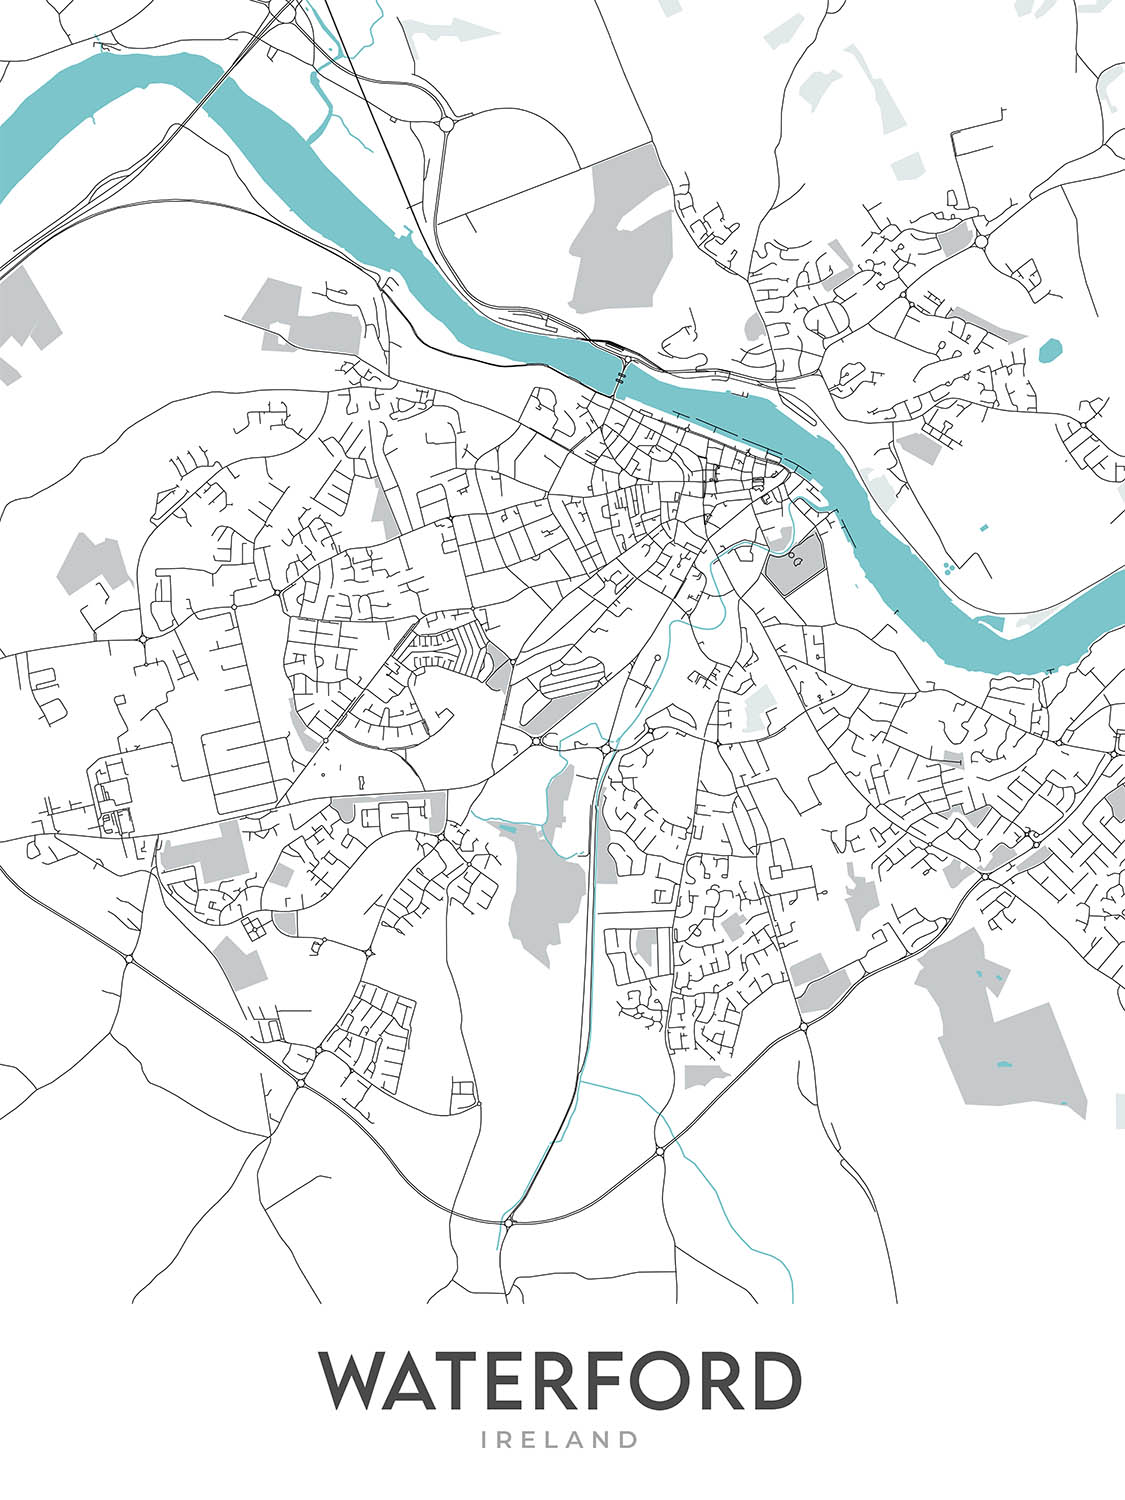 Modern City Map of Waterford, Ireland: Castle, Reginald's Tower, Christ Church Cathedral, Holy Trinity Cathedral, River Suir